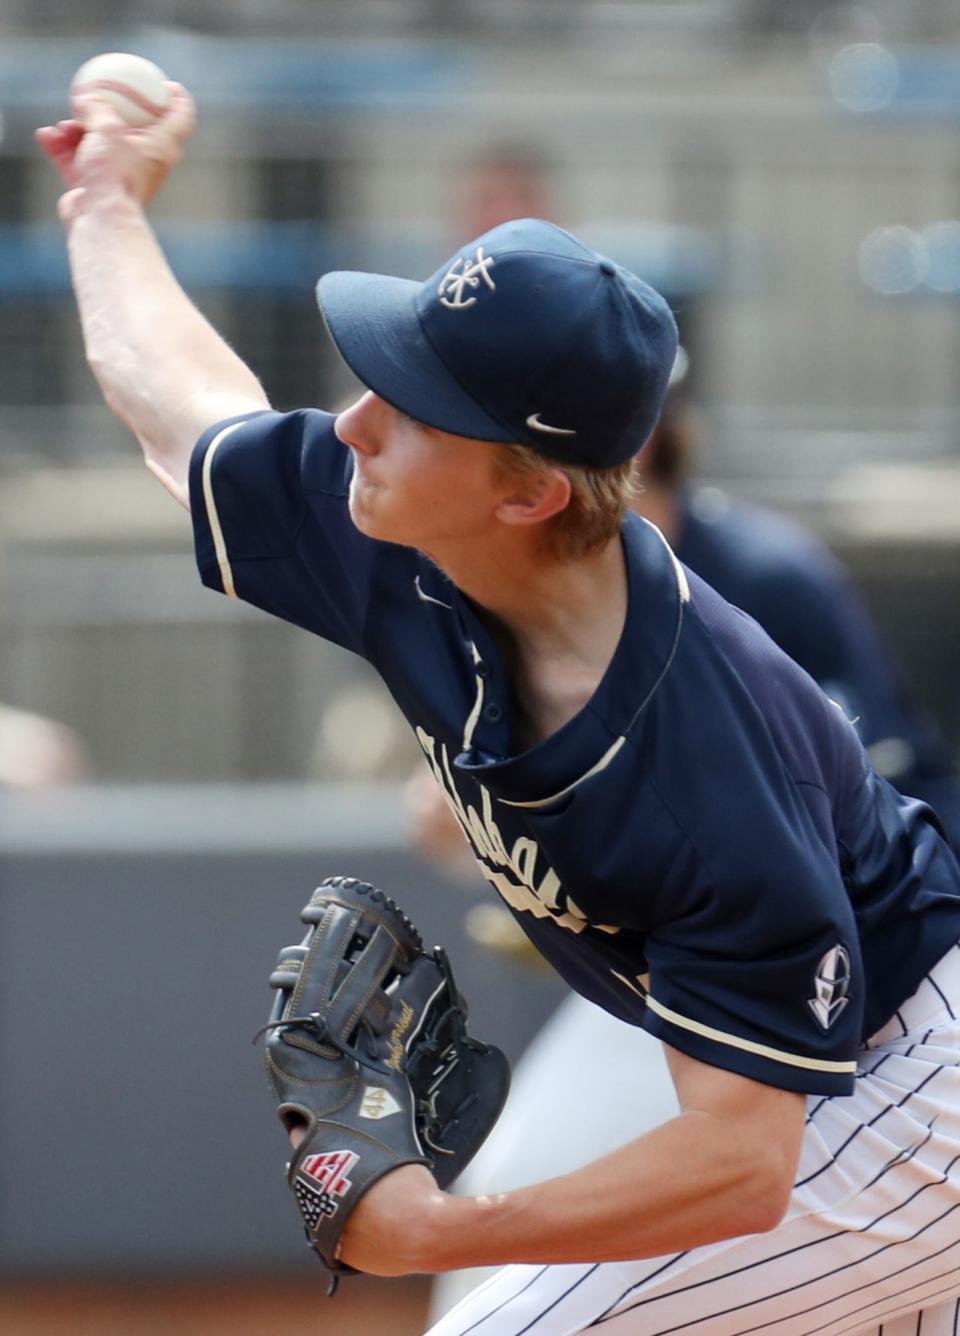 Sophomore pitcher Noah LaFine will be back next year as a key returner for an Archbishop Hoban baseball team that will be trying to make it to the state tournament for the third year in a row.